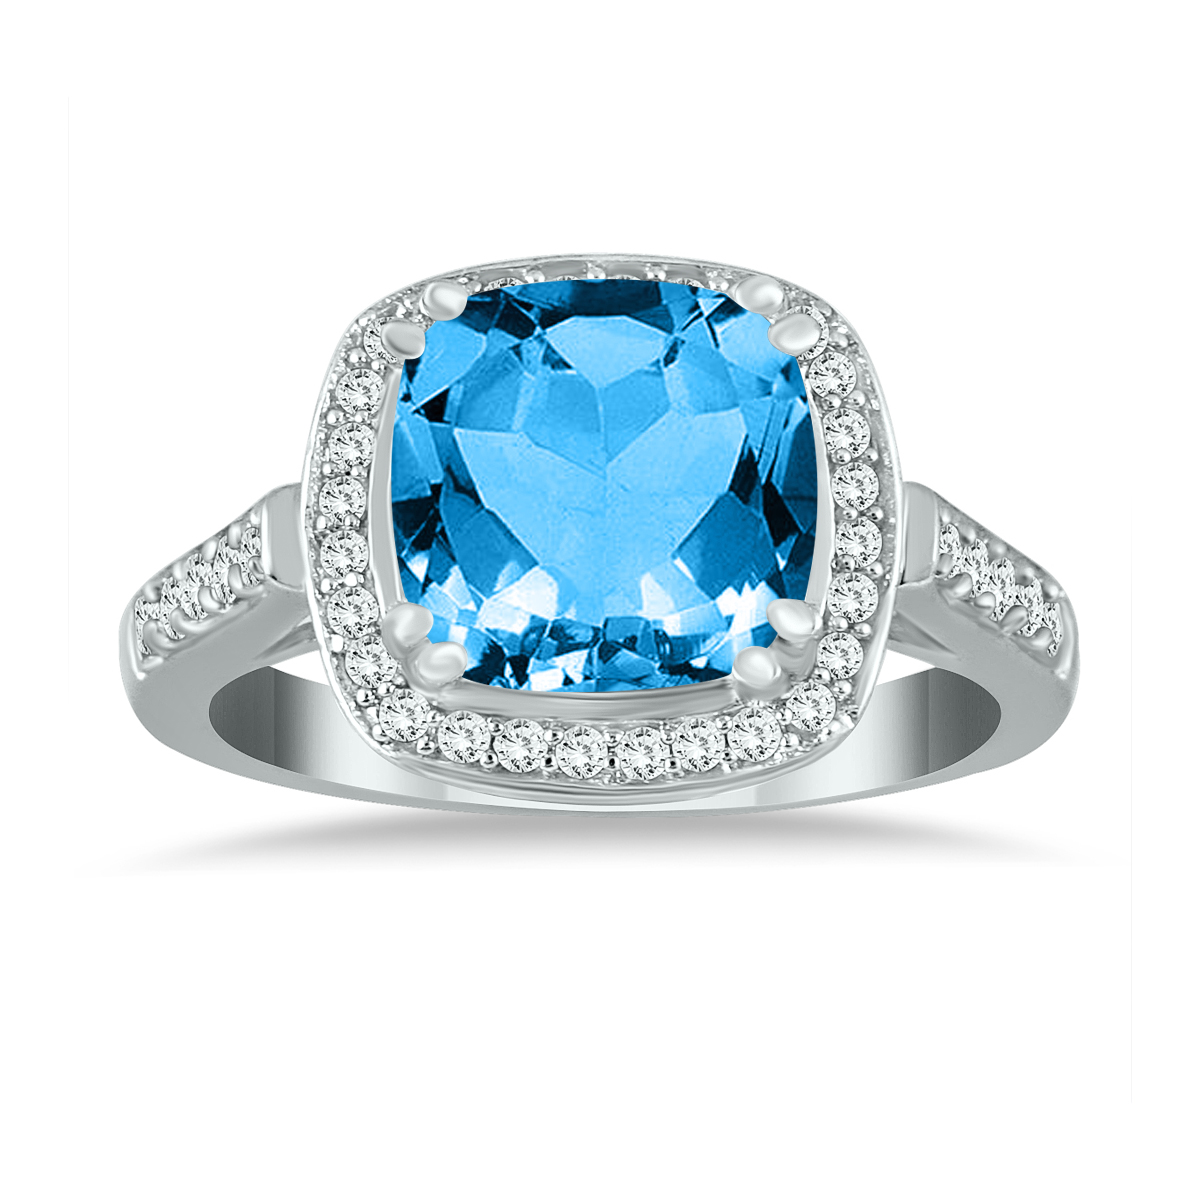 Cushion Cut Blue Topaz and Diamond Ring in 14K White Gold